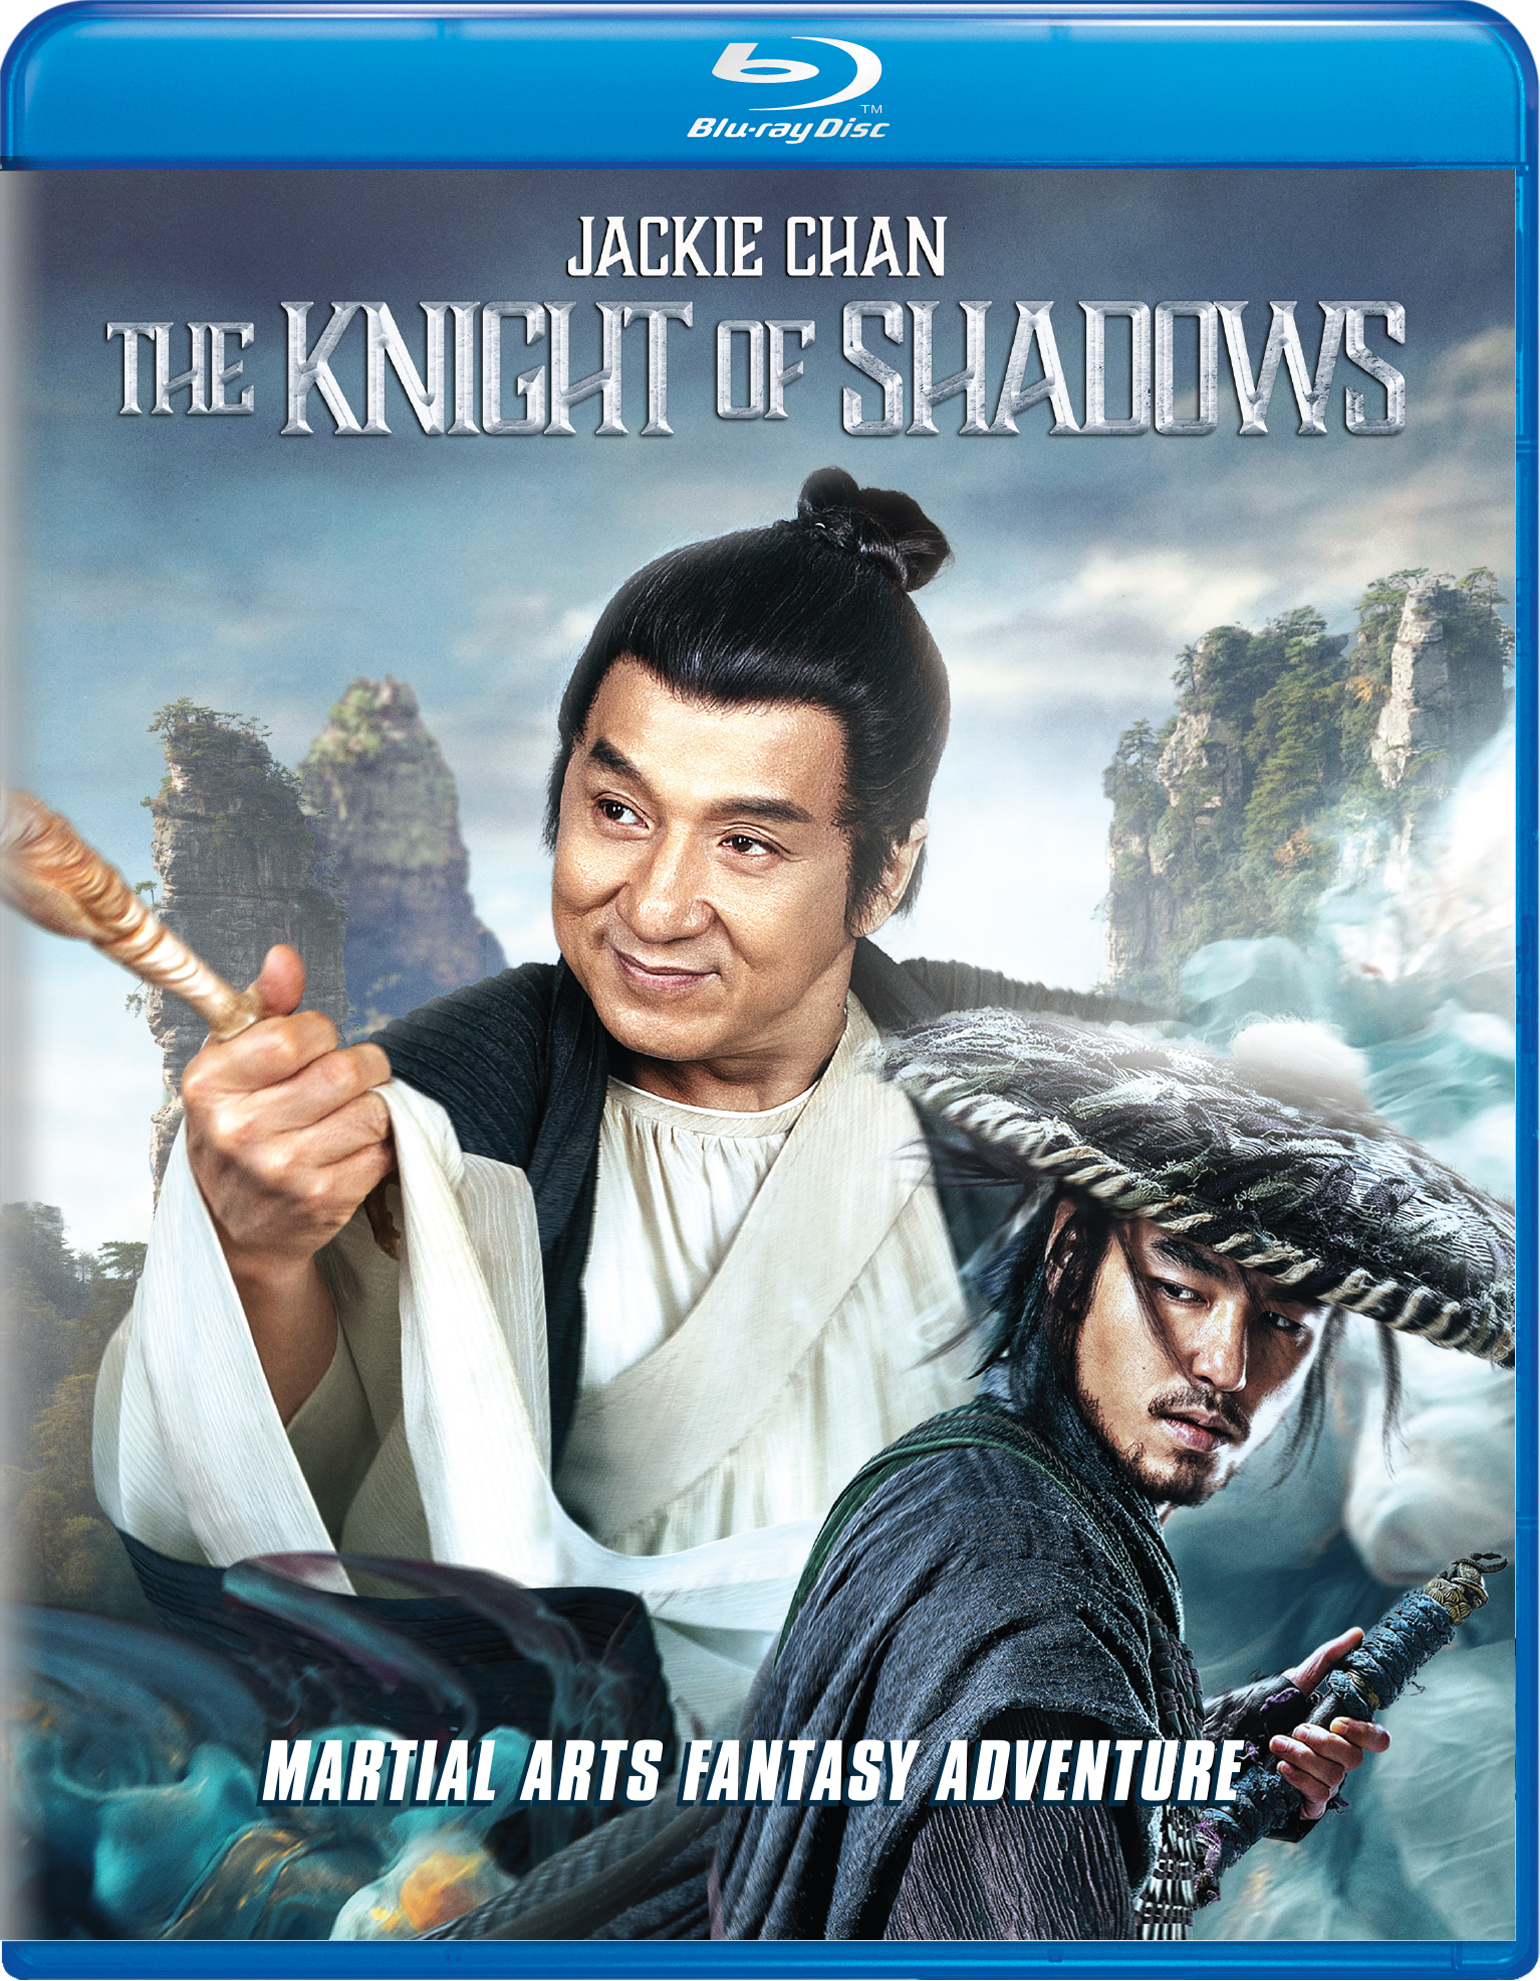 The Knight Of Shadows - Blu-ray [ 2019 ]  - Action Movies On Blu-ray - Movies On GRUV